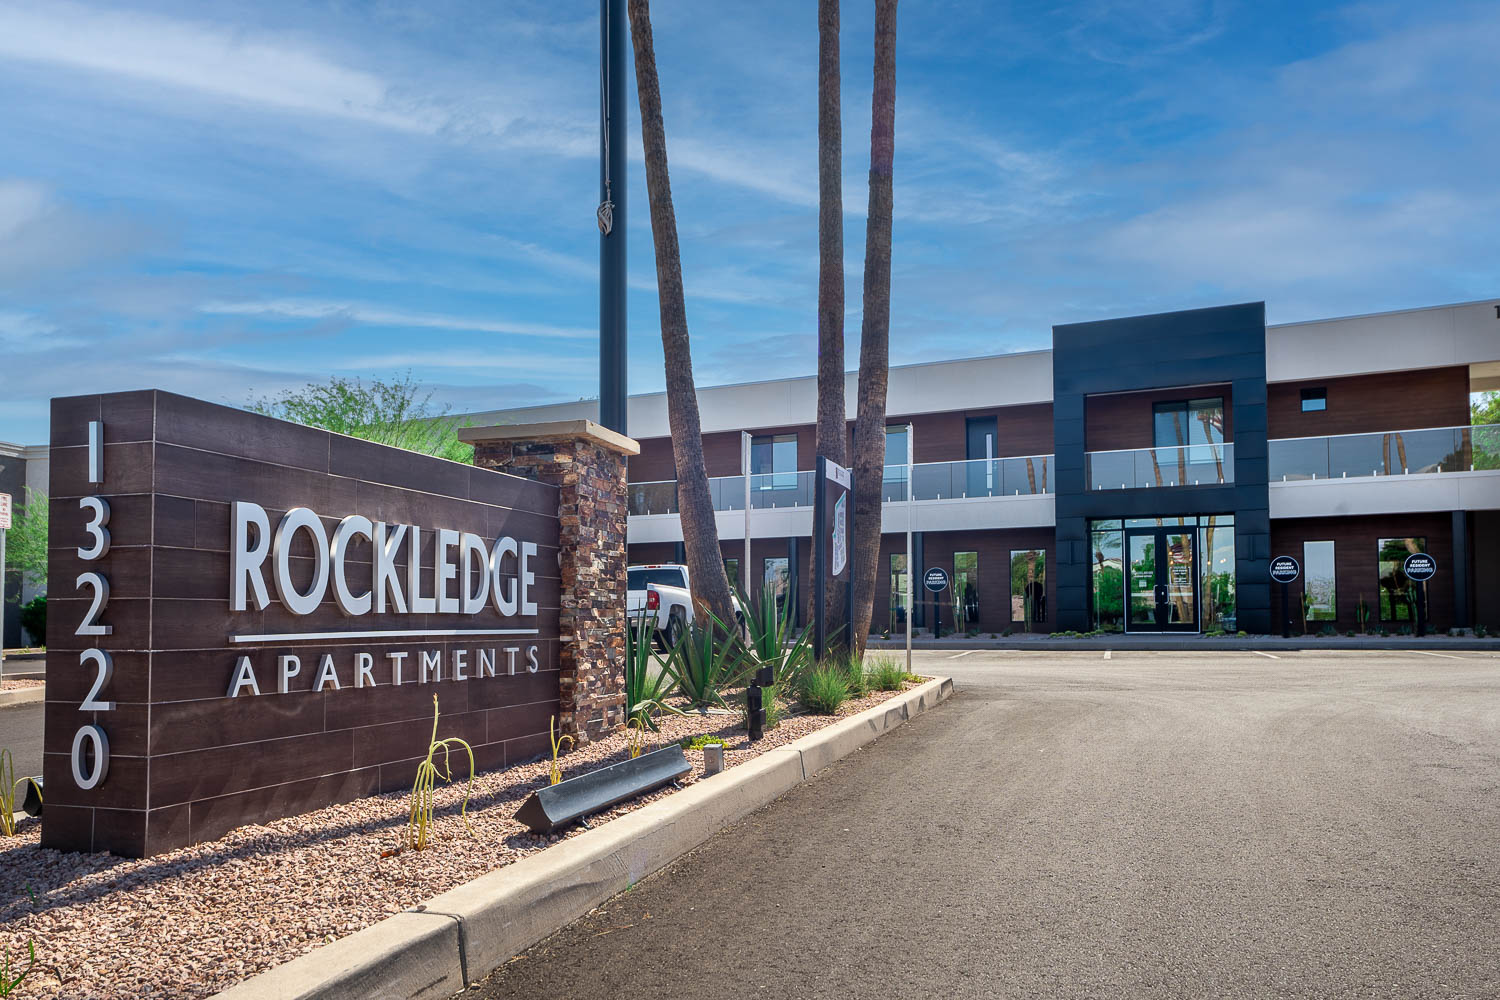 Rockledge Apartment exterior view of front sign and front building as you enter complex